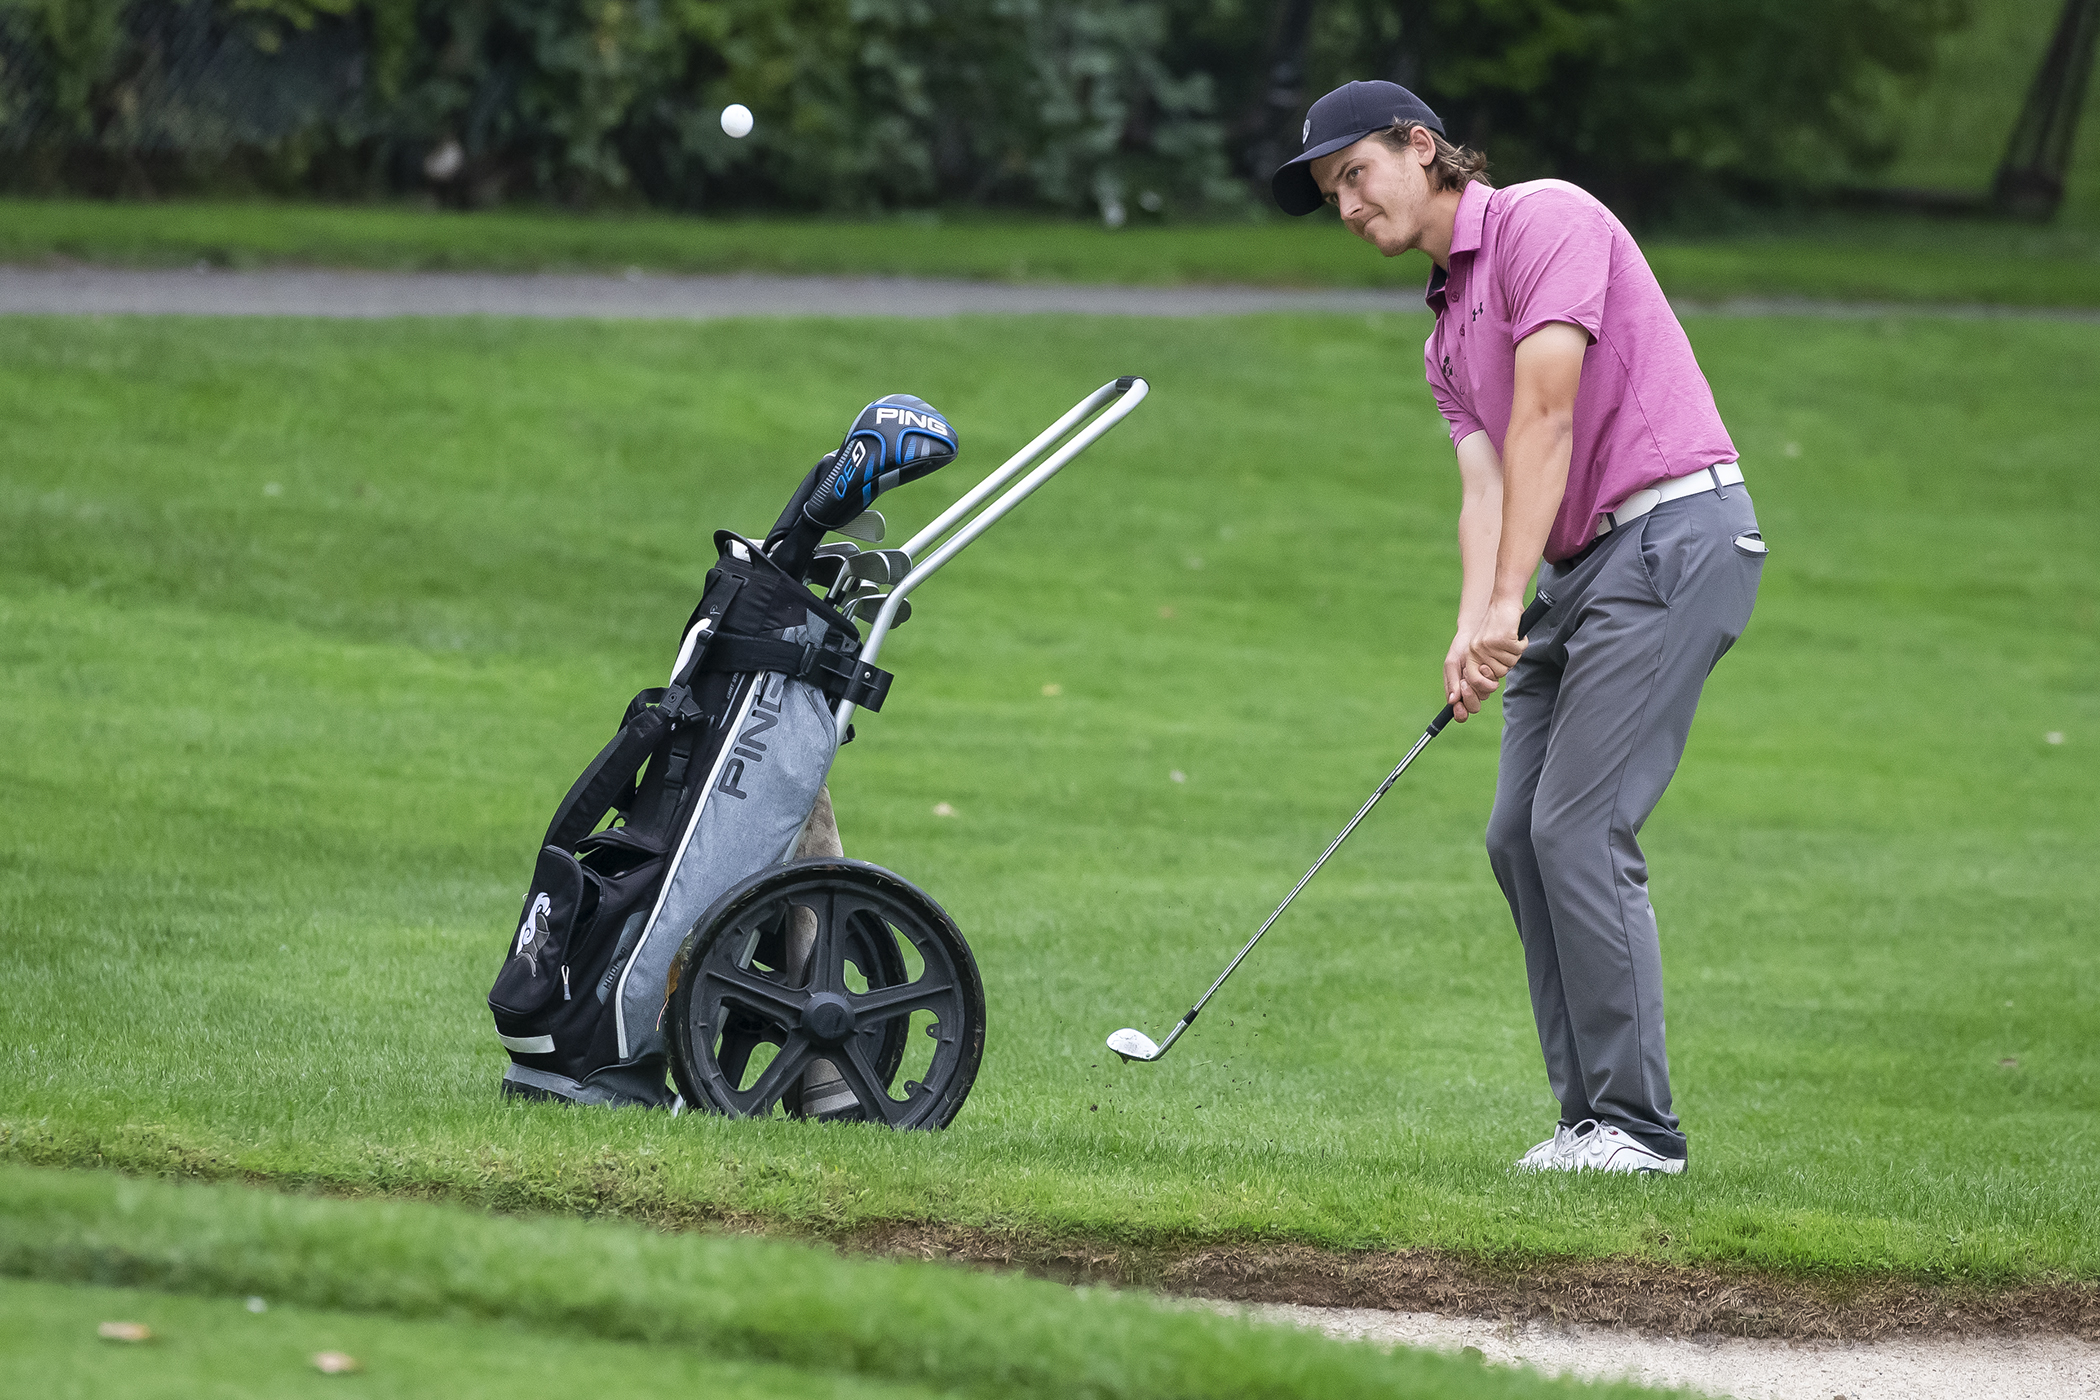 RECAP: Gee-Gees men&rsquo;s golf places first at OUA Regional Qualifiers, teeing up Championship push